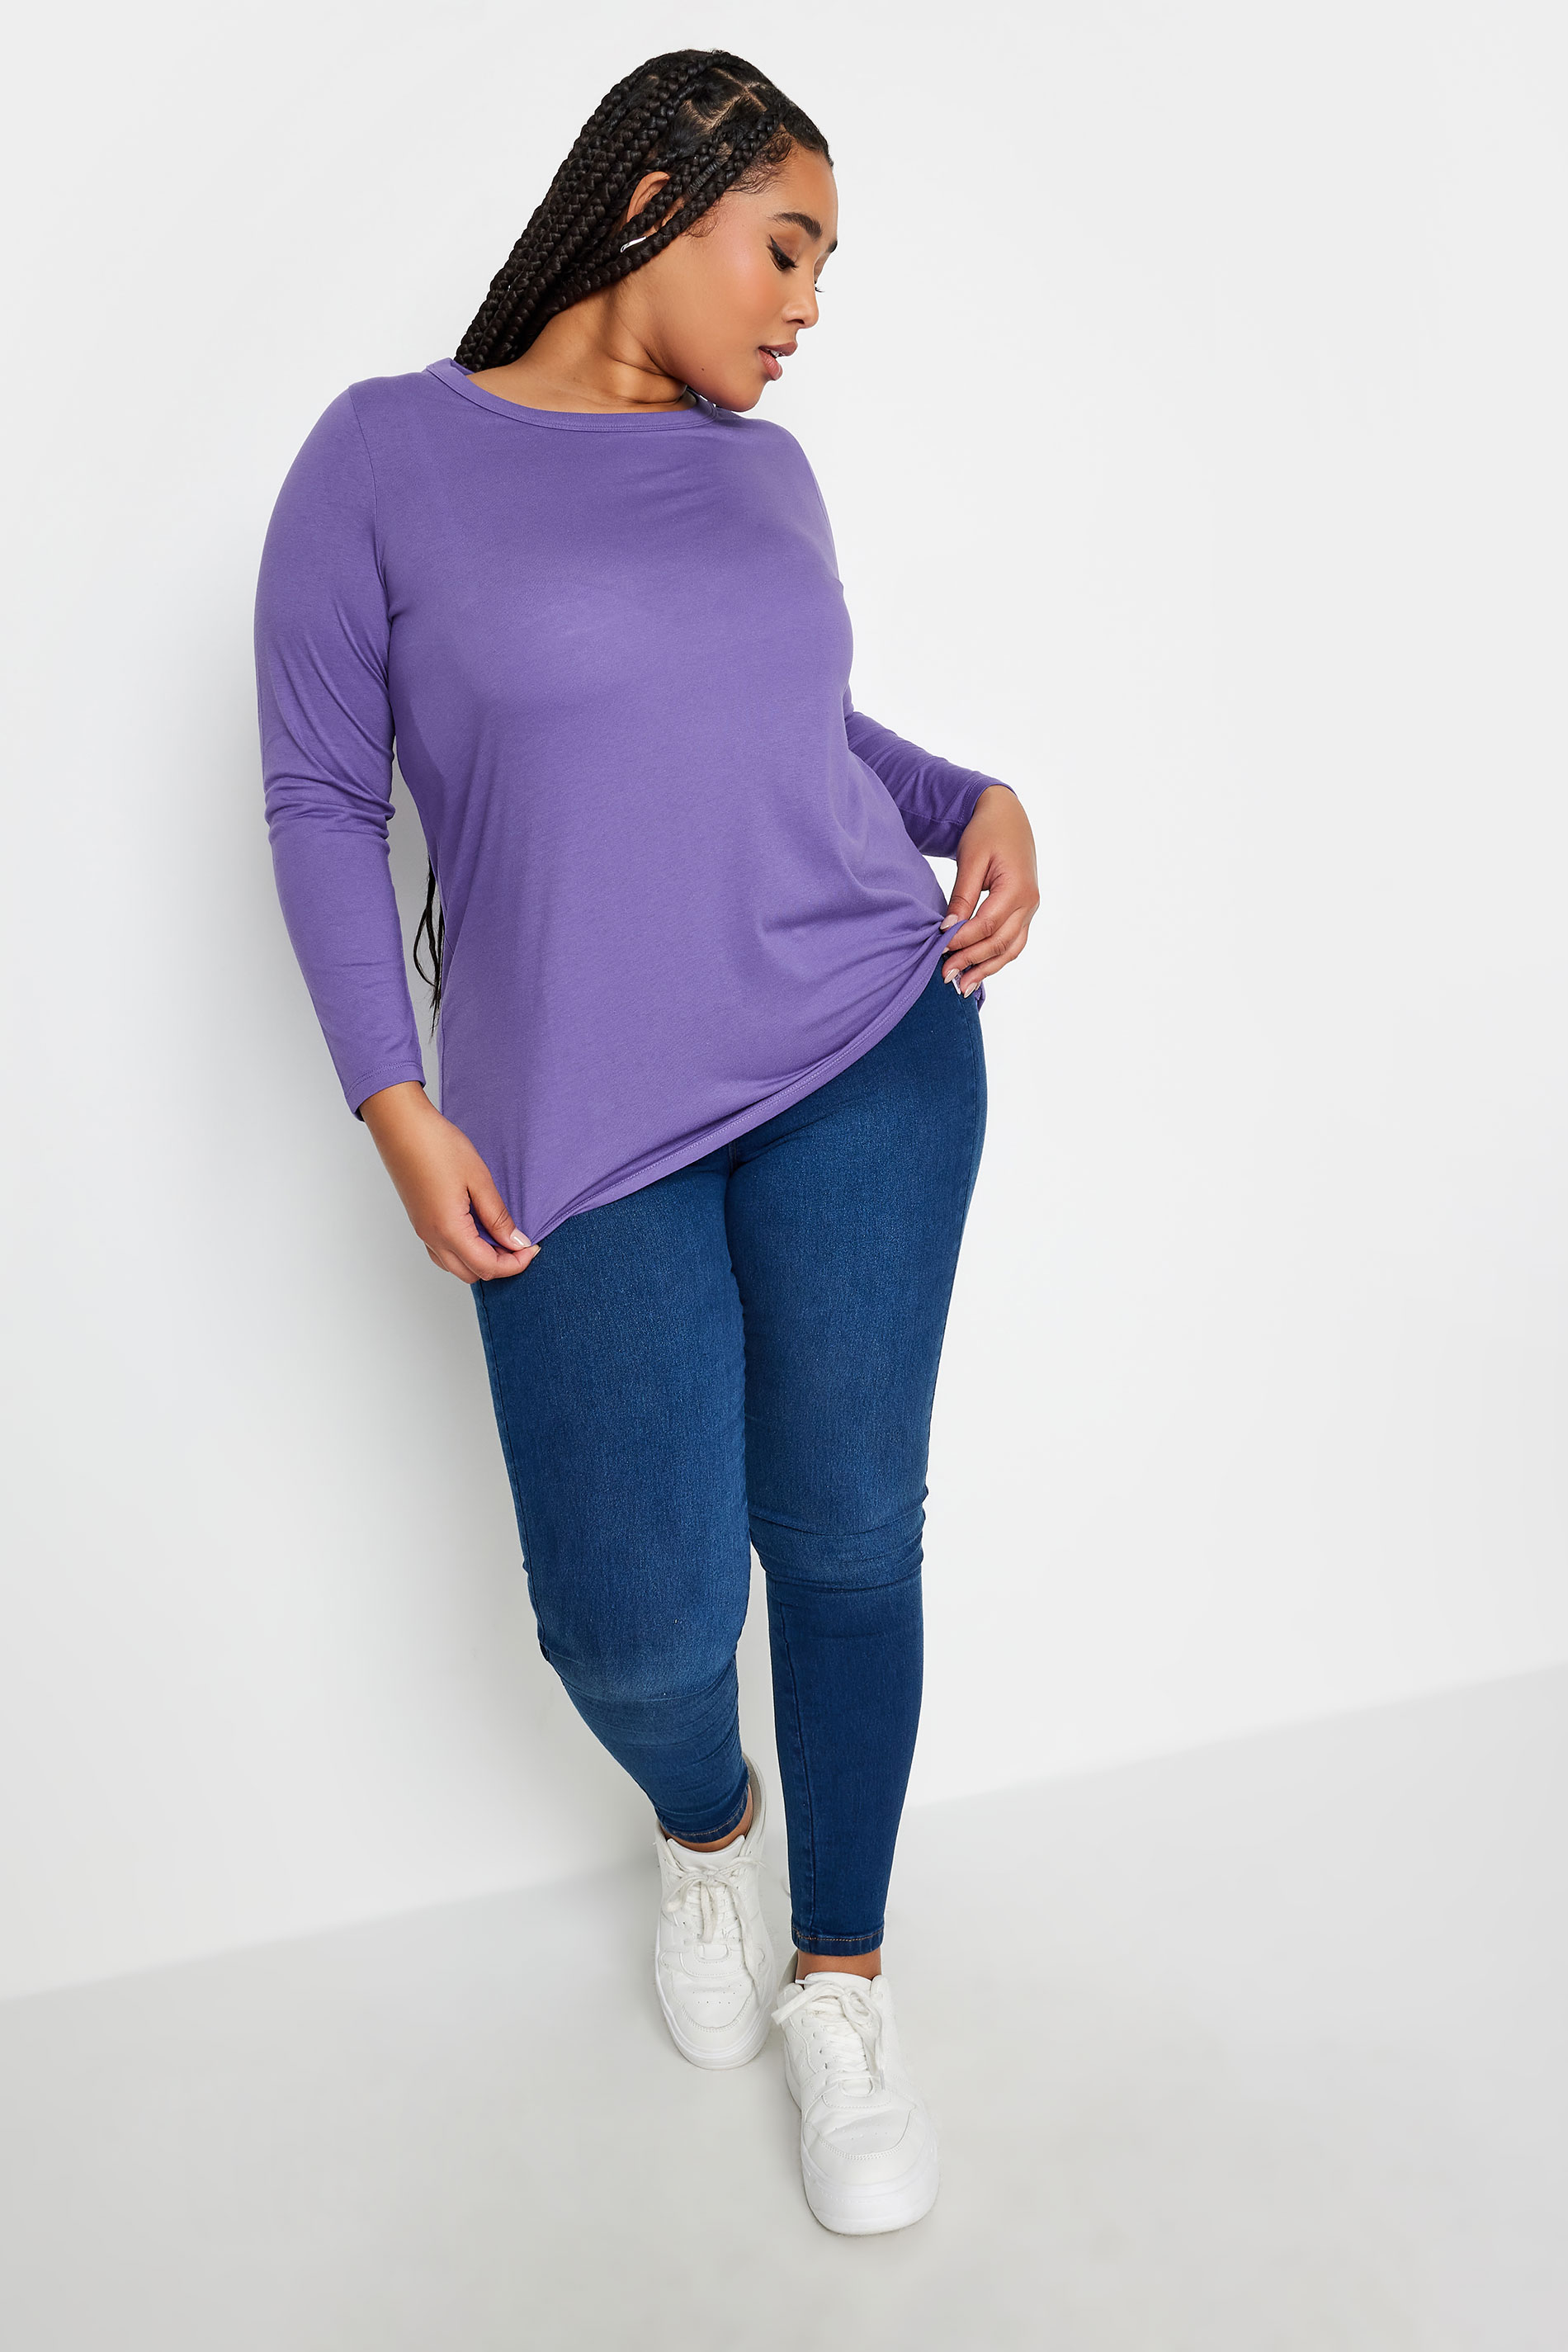 YOURS Plus Size Purple Long Sleeve Top | Yours Clothing 2